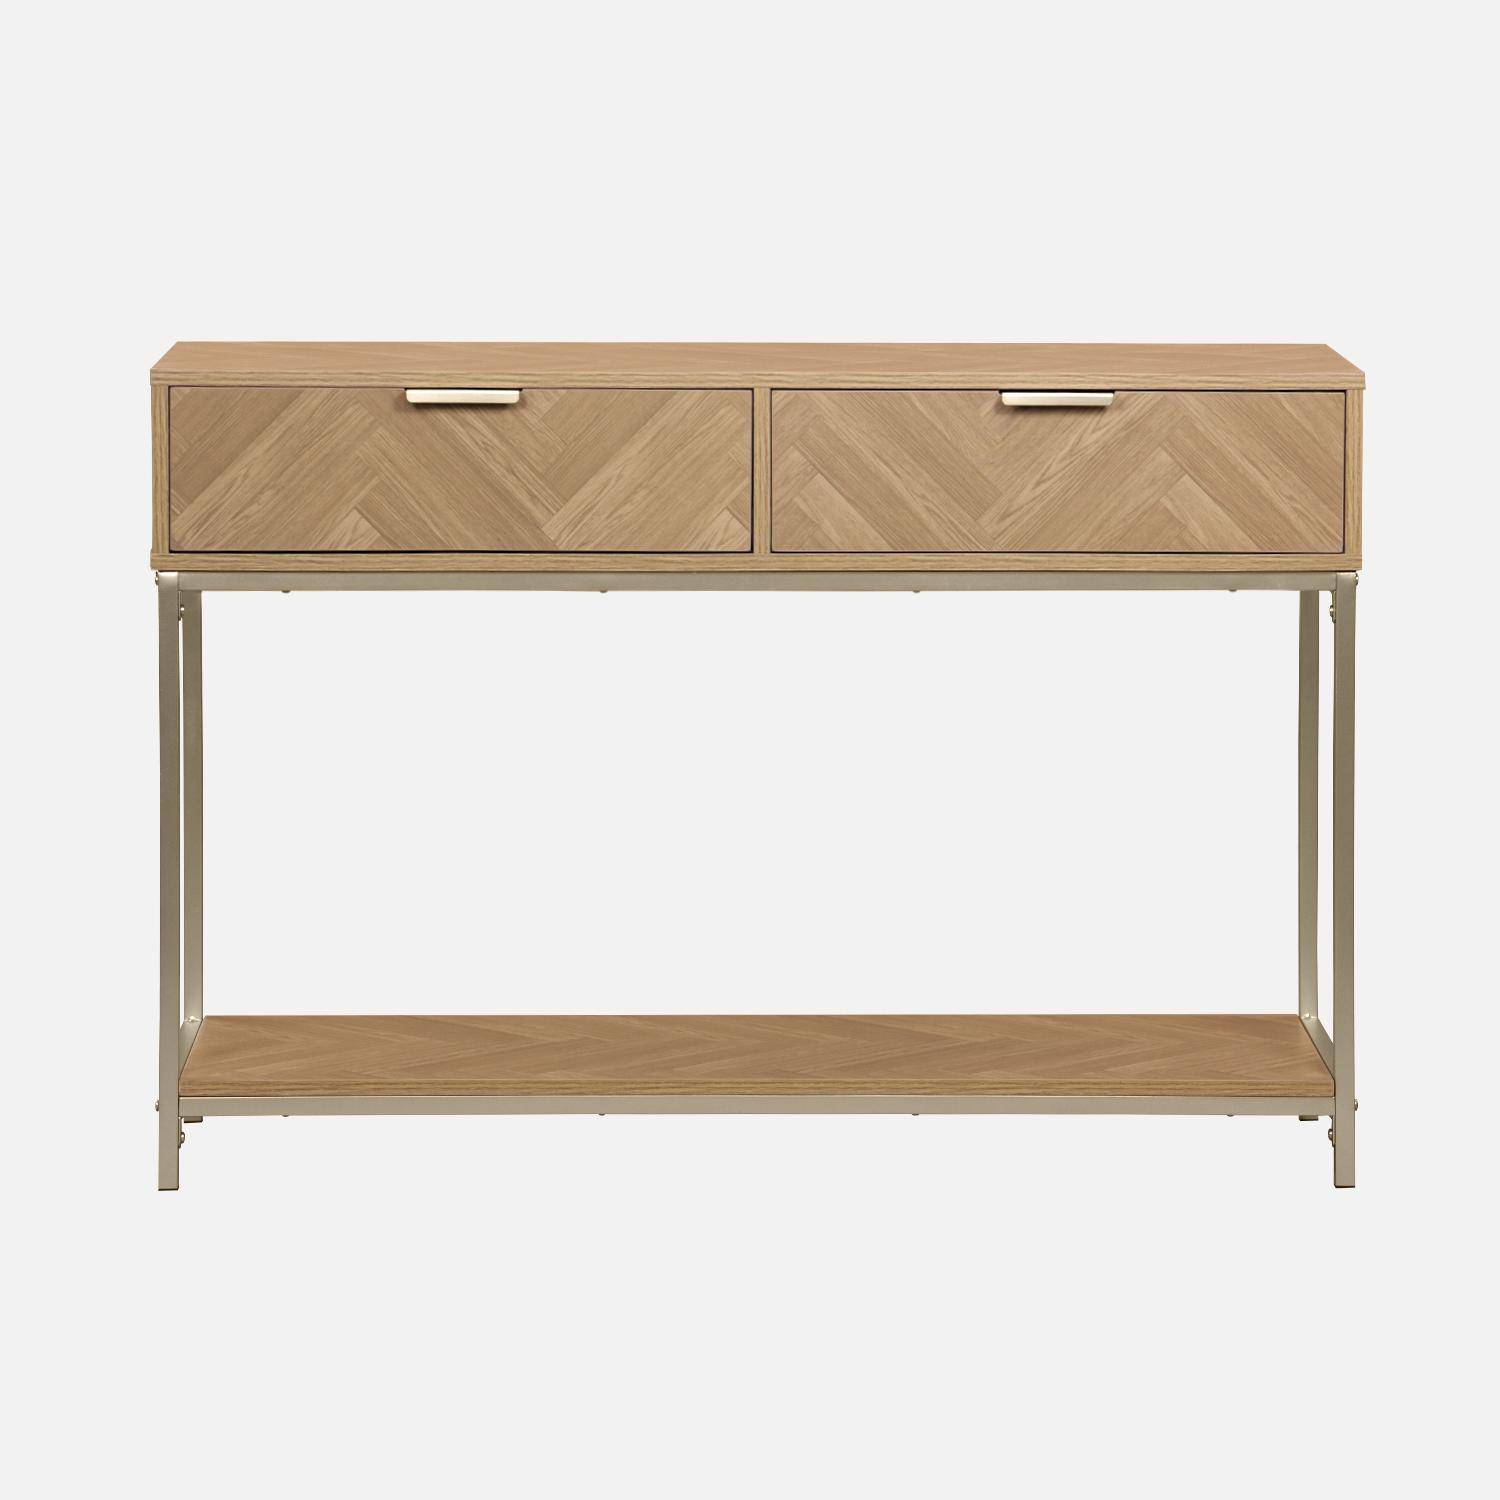 Herringbone hallway console table with 2 drawers, 110x35x75cm - Budapest - Natural,sweeek,Photo4